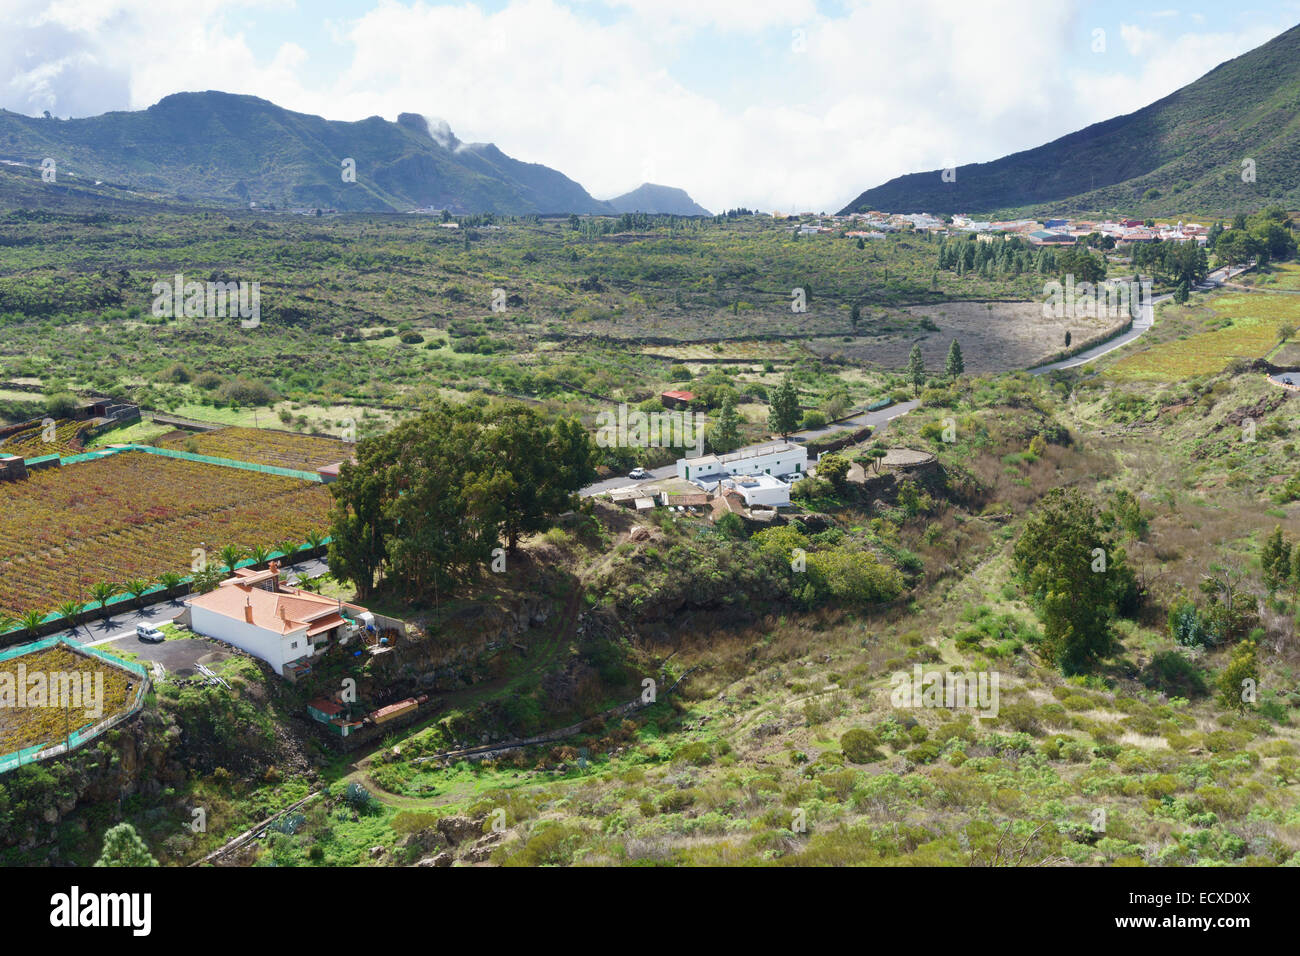 Tenerife - Valle de Arriba. Vineyards and agriculture. Stock Photo